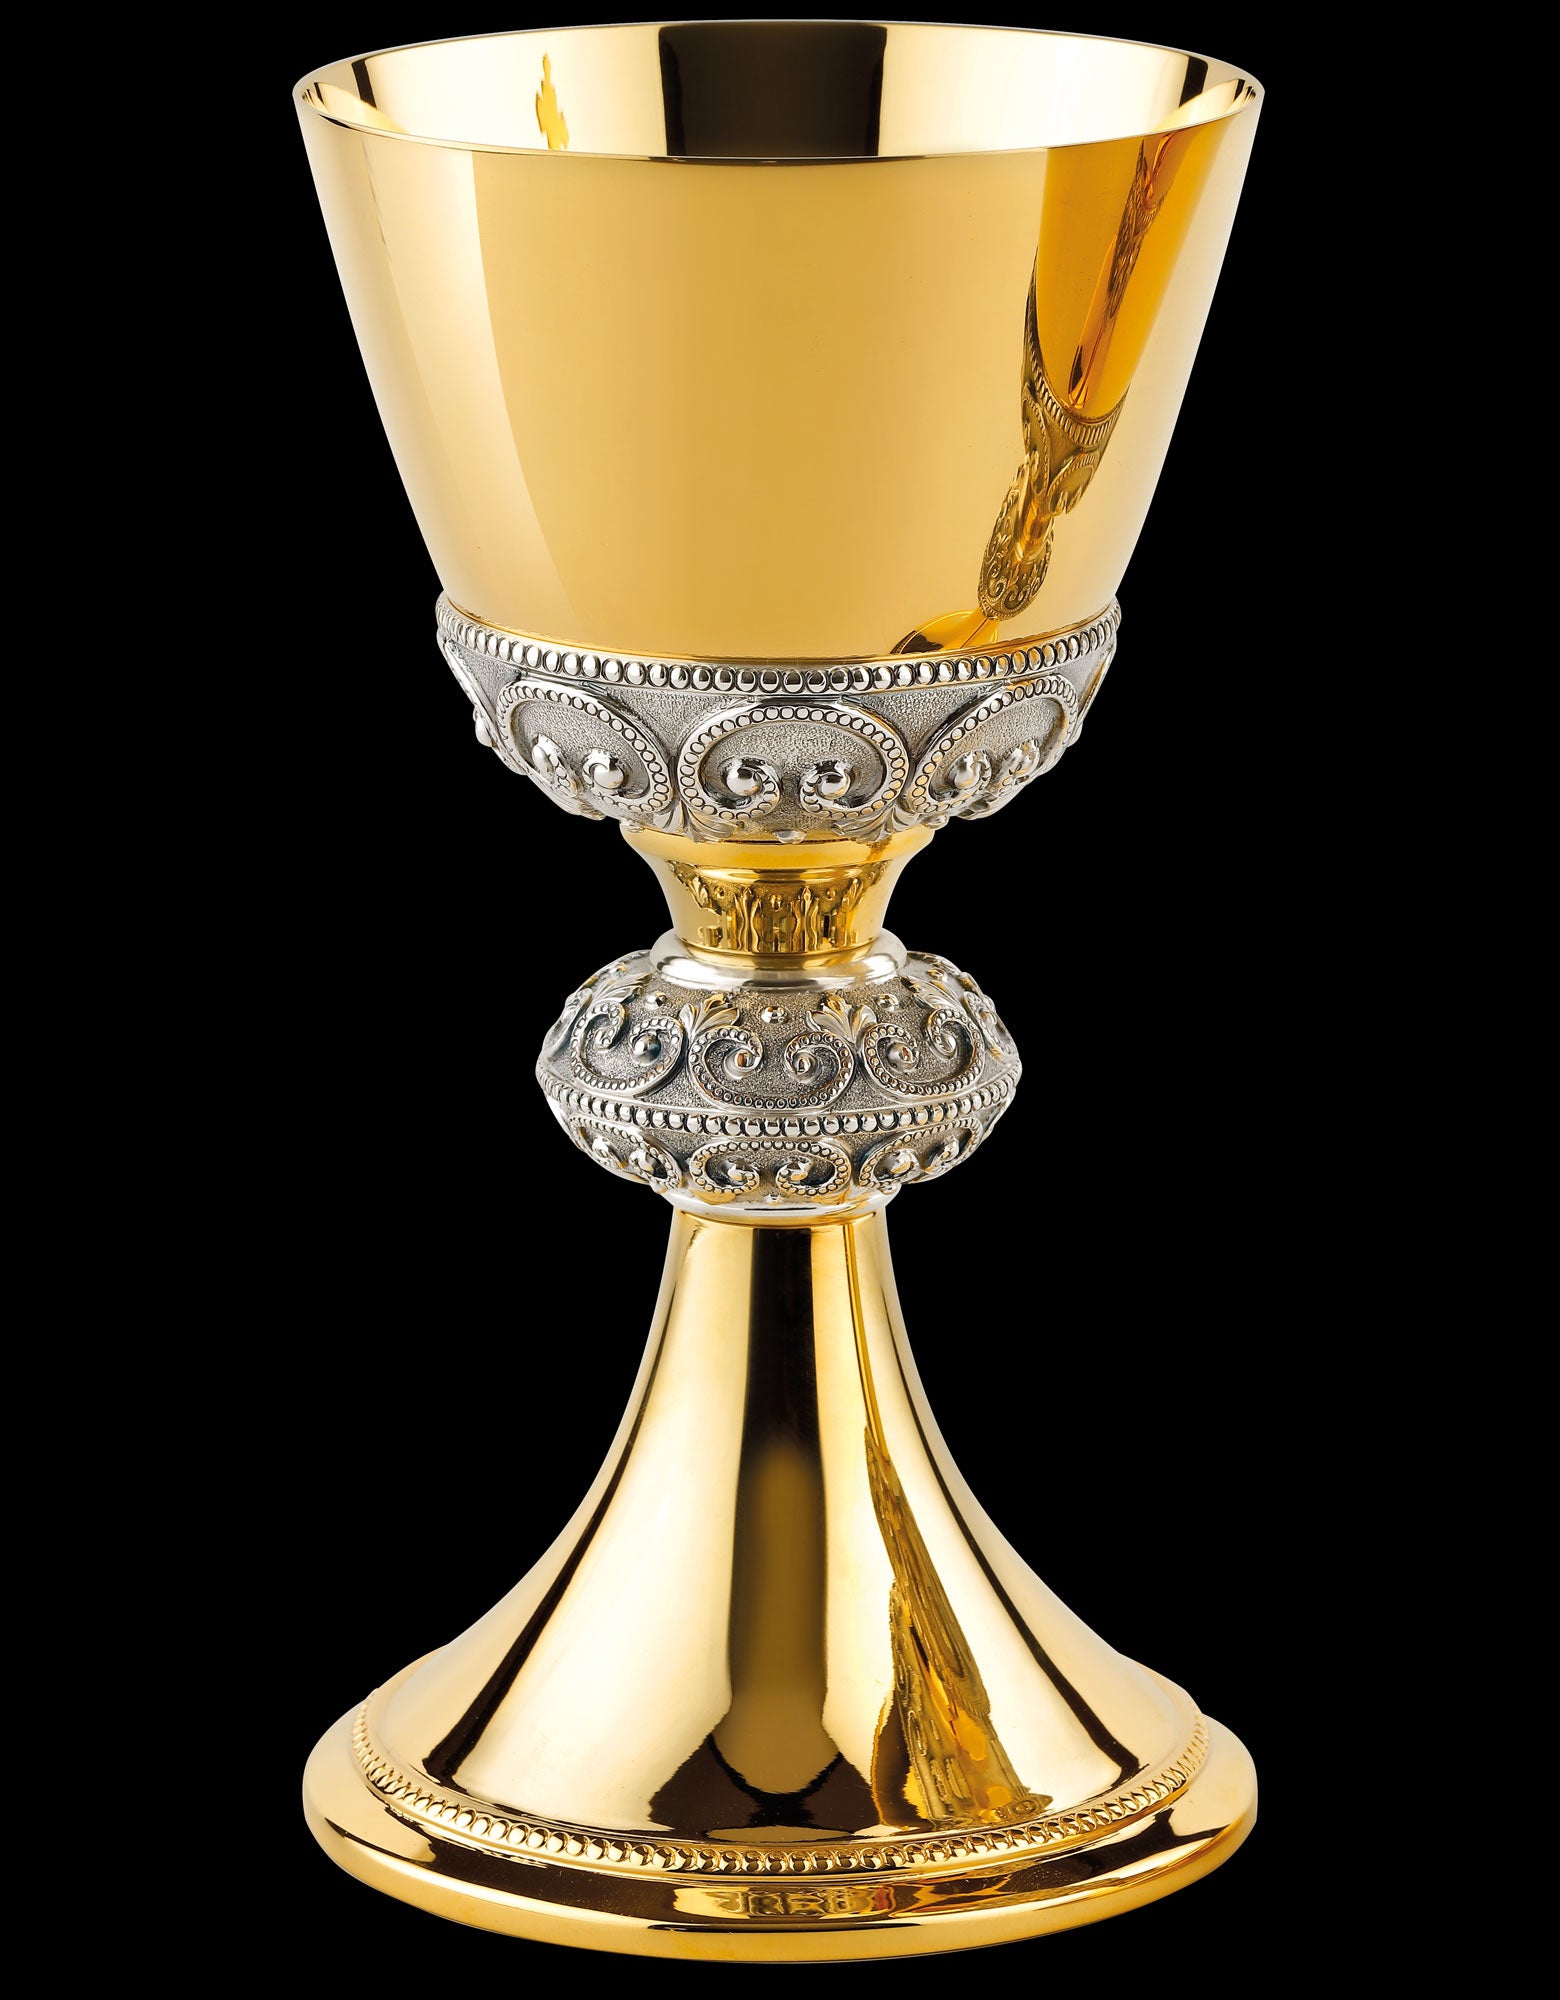 gold-chalice-silver-accents-2215.jpg